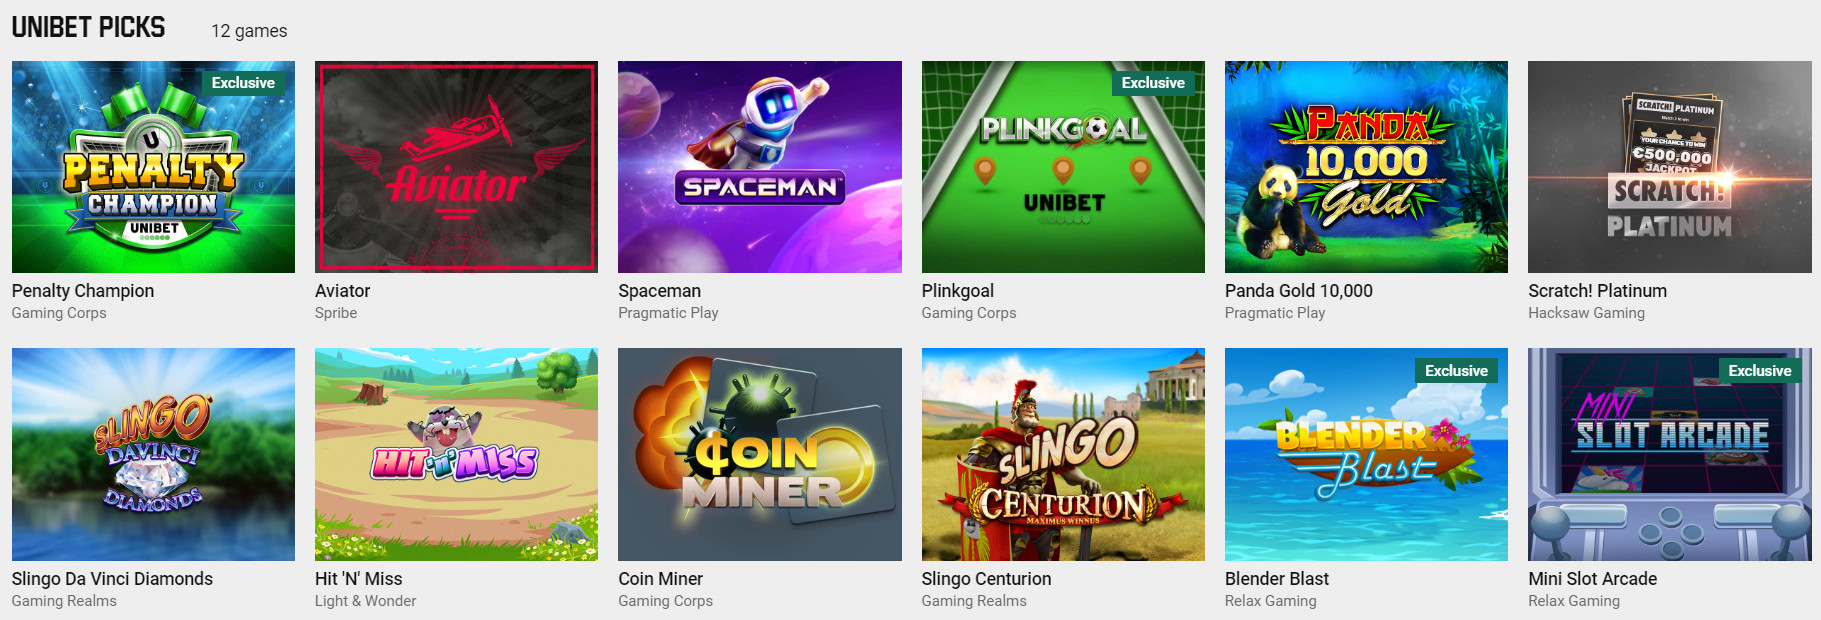 Special Games Section at Unibet Casino